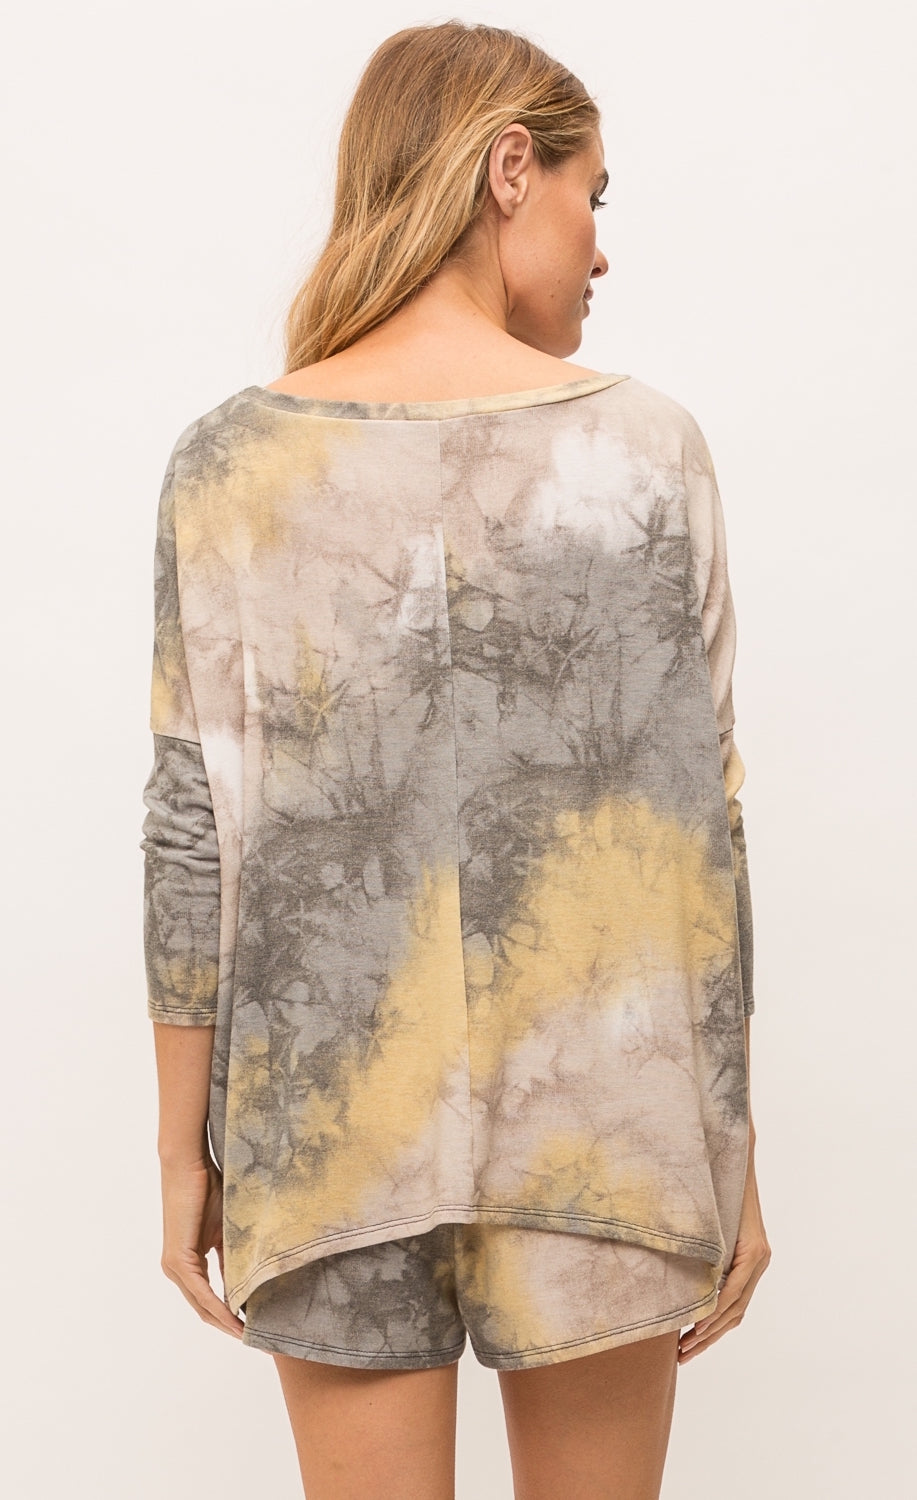 Back top half view of a woman wearing the mystree bluestone tie dye top. This top is a grey and yellow tie top with long sleeves and a boxy fit.